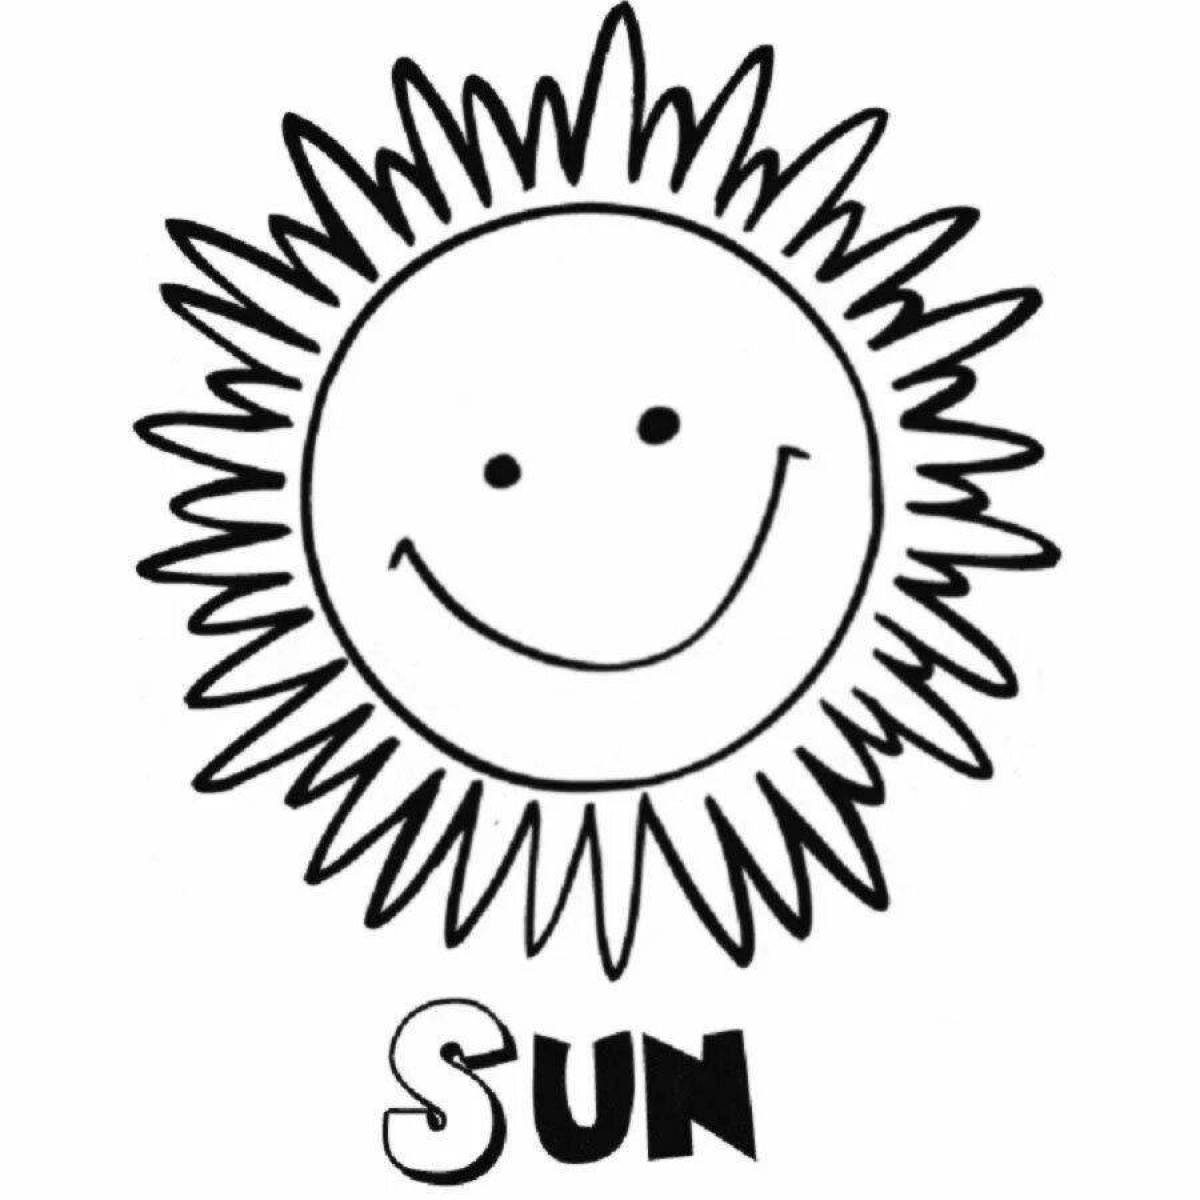 Sunshine dazzling coloring book for kids